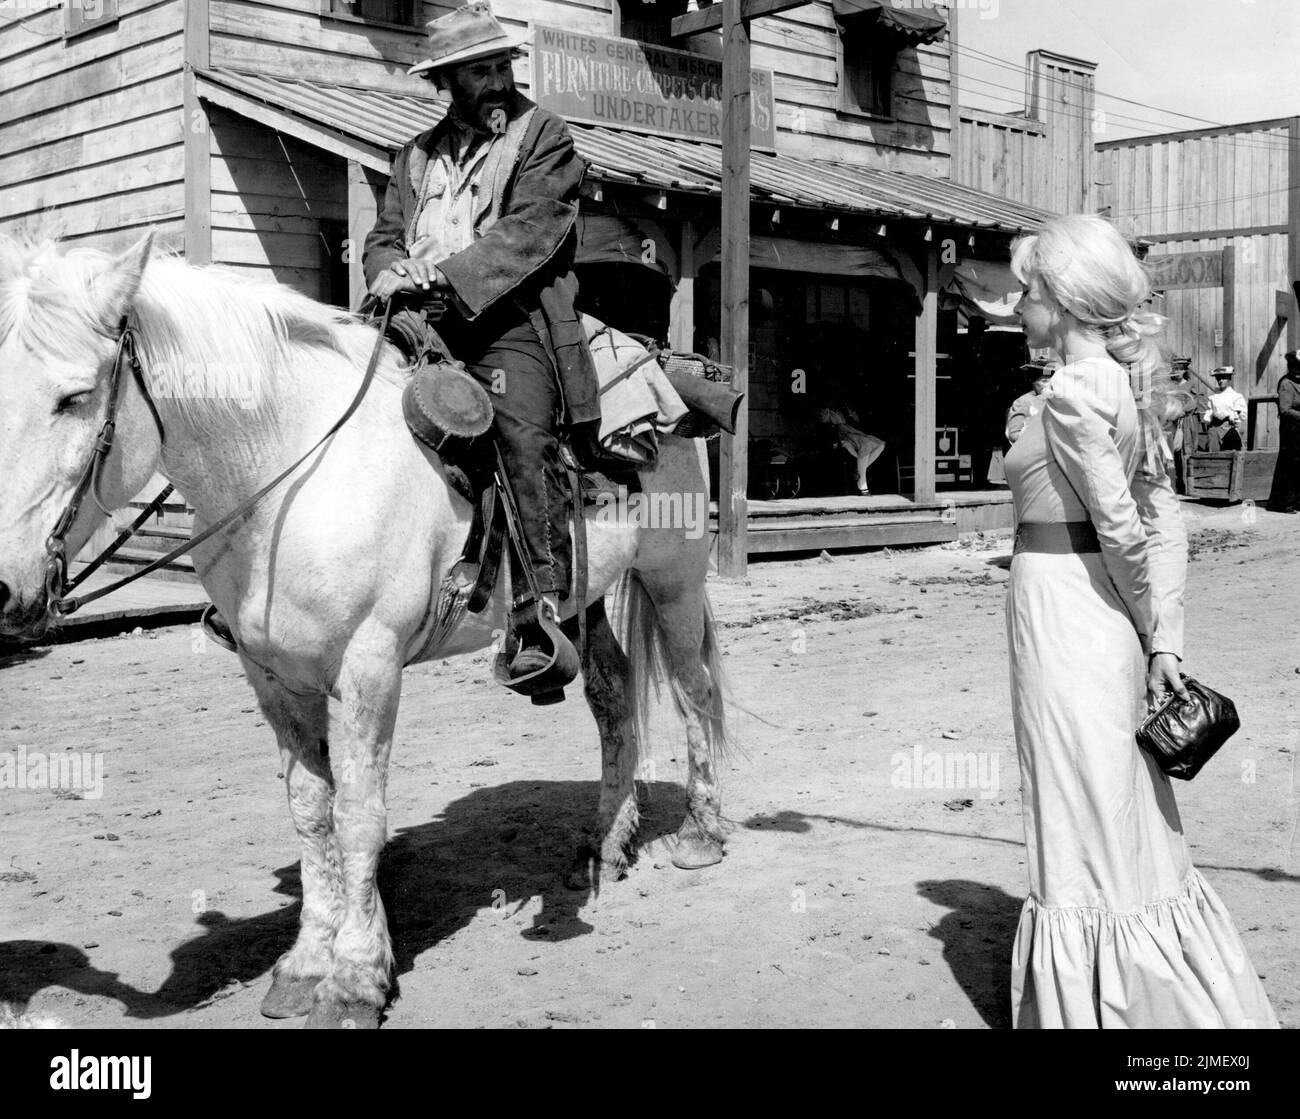 STELLA STEVENS and JASON ROBARDS JR in THE BALLAD OF CABLE HOGUE (1970), directed by SAM PECKINPAH. Credit: WARNER BROTHERS / Album Stock Photo